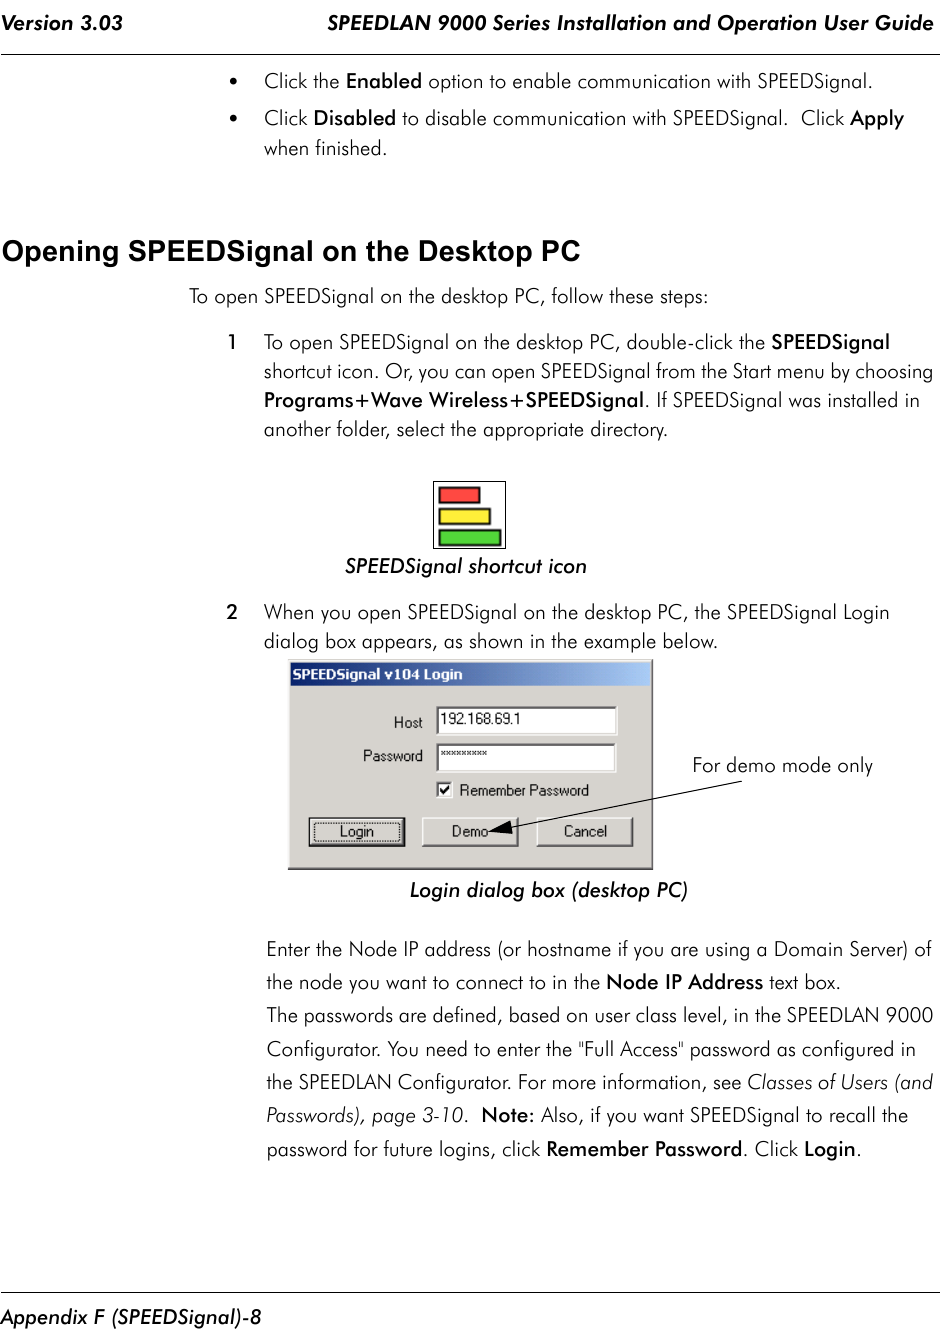 Version 3.03                                 SPEEDLAN 9000 Series Installation and Operation User Guide Appendix F (SPEEDSignal)-8•Click the Enabled option to enable communication with SPEEDSignal.•Click Disabled to disable communication with SPEEDSignal.  Click Apply when finished.Opening SPEEDSignal on the Desktop PCTo open SPEEDSignal on the desktop PC, follow these steps:1To open SPEEDSignal on the desktop PC, double-click the SPEEDSignal shortcut icon. Or, you can open SPEEDSignal from the Start menu by choosing Programs+Wave Wireless+SPEEDSignal. If SPEEDSignal was installed in another folder, select the appropriate directory.                            SPEEDSignal shortcut icon2When you open SPEEDSignal on the desktop PC, the SPEEDSignal Logindialog box appears, as shown in the example below.                                       Login dialog box (desktop PC)Enter the Node IP address (or hostname if you are using a Domain Server) of the node you want to connect to in the Node IP Address text box. The passwords are defined, based on user class level, in the SPEEDLAN 9000 Configurator. You need to enter the &quot;Full Access&quot; password as configured in the SPEEDLAN Configurator. For more information, see Classes of Users (and Passwords), page 3-10.  Note: Also, if you want SPEEDSignal to recall the password for future logins, click Remember Password. Click Login. For demo mode only